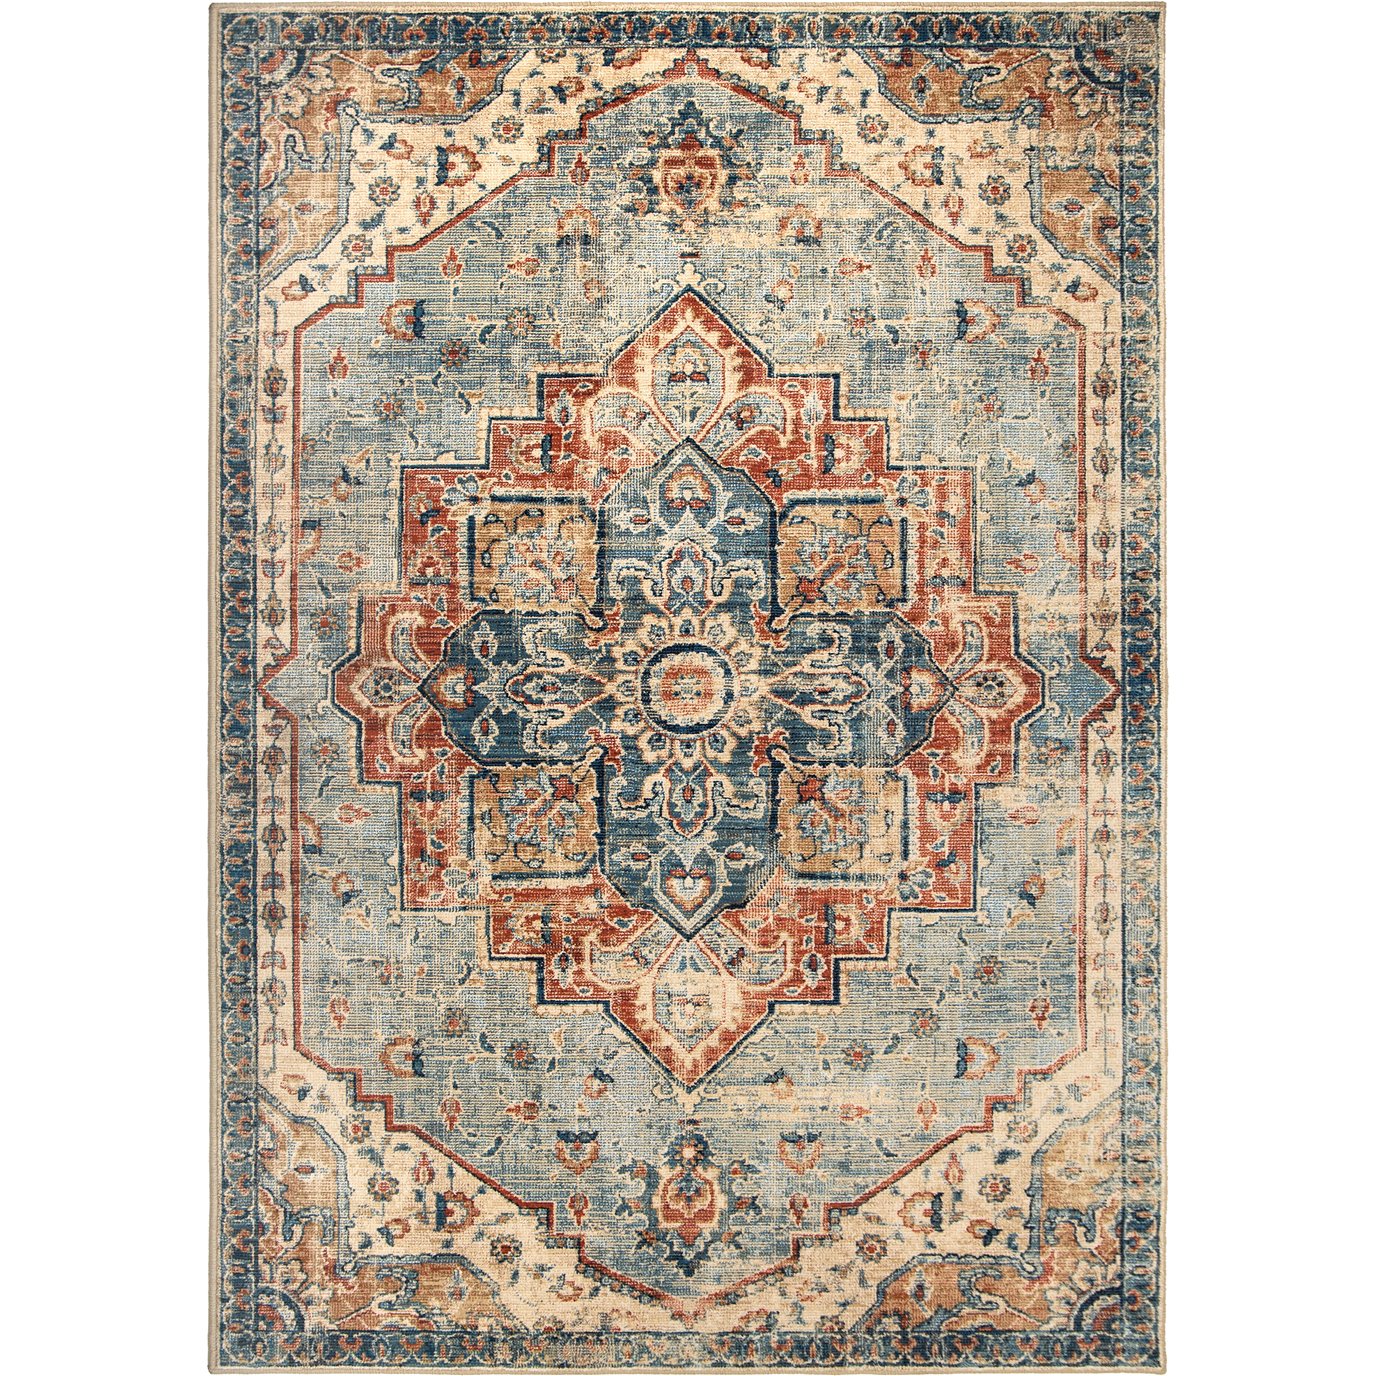 King Fisher Pale Blue 6'7"x9'6" Rug